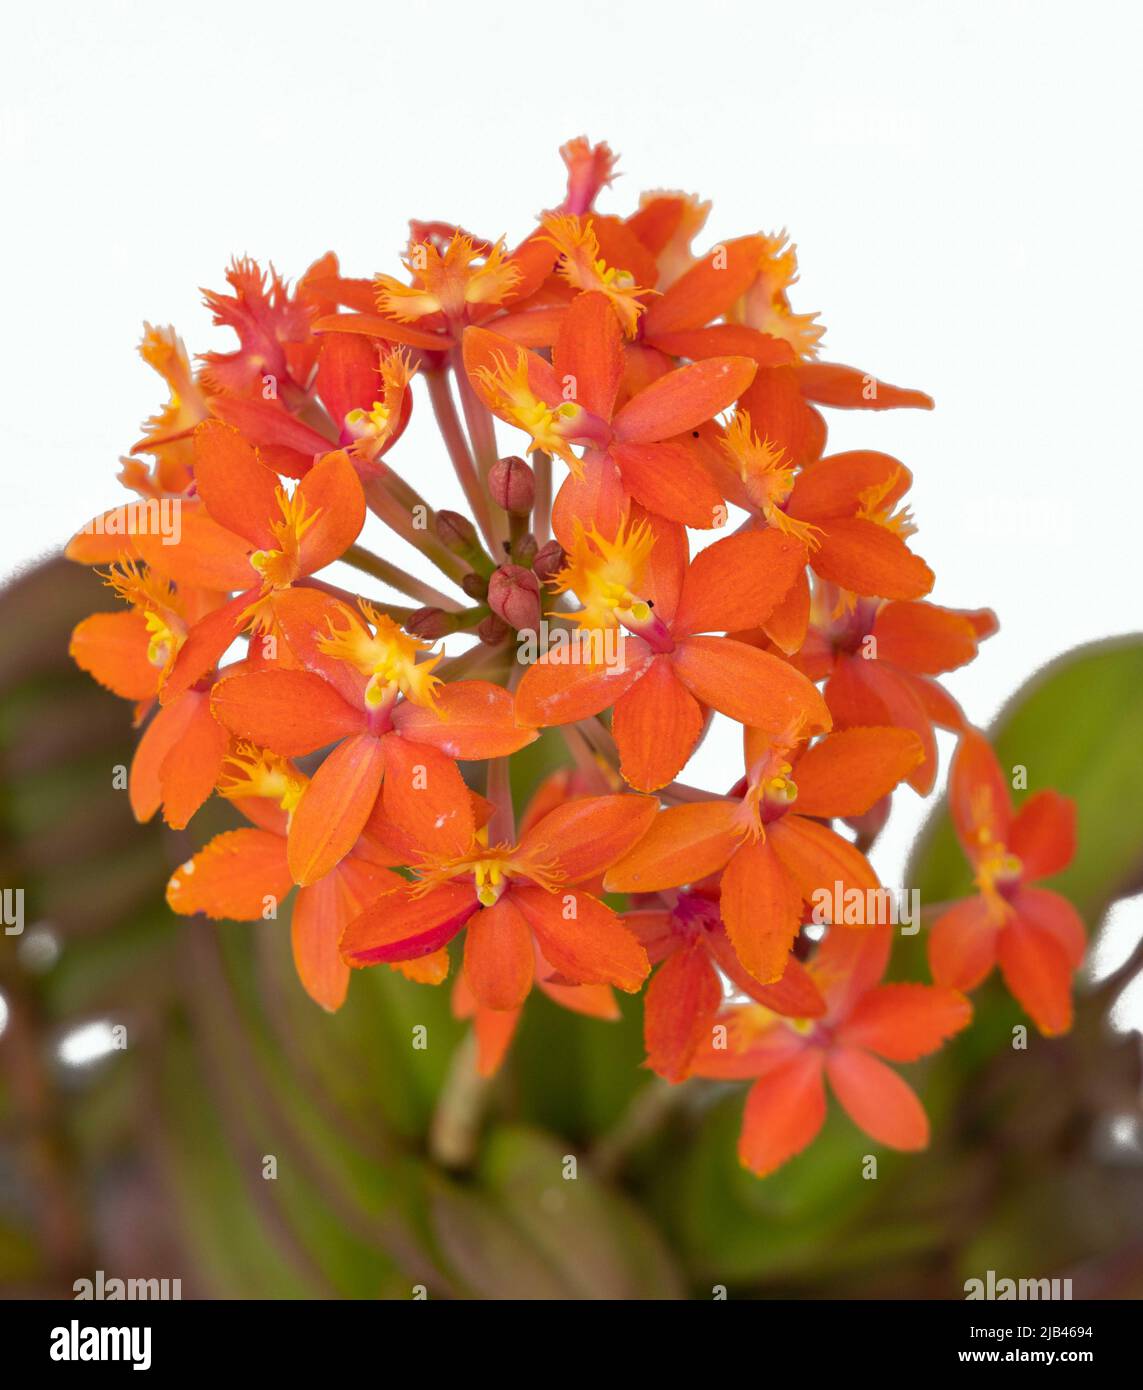 Cluster of orange epidendrum blossoms against a white background Stock Photo